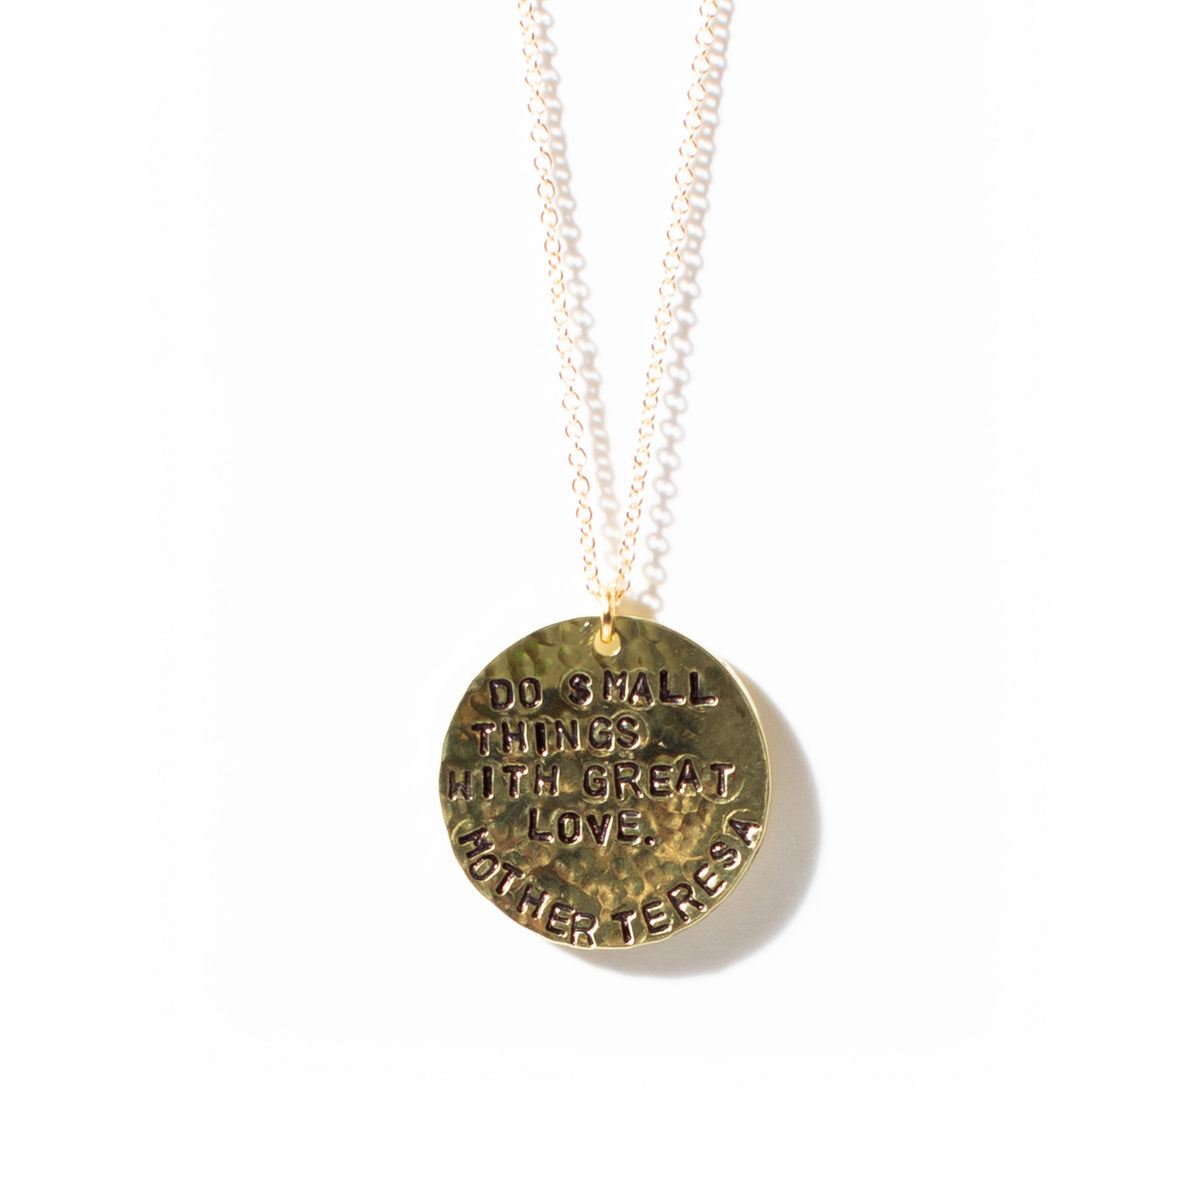 Do Small Things....Mother Teresa Metal Stamped Inspirational Necklace